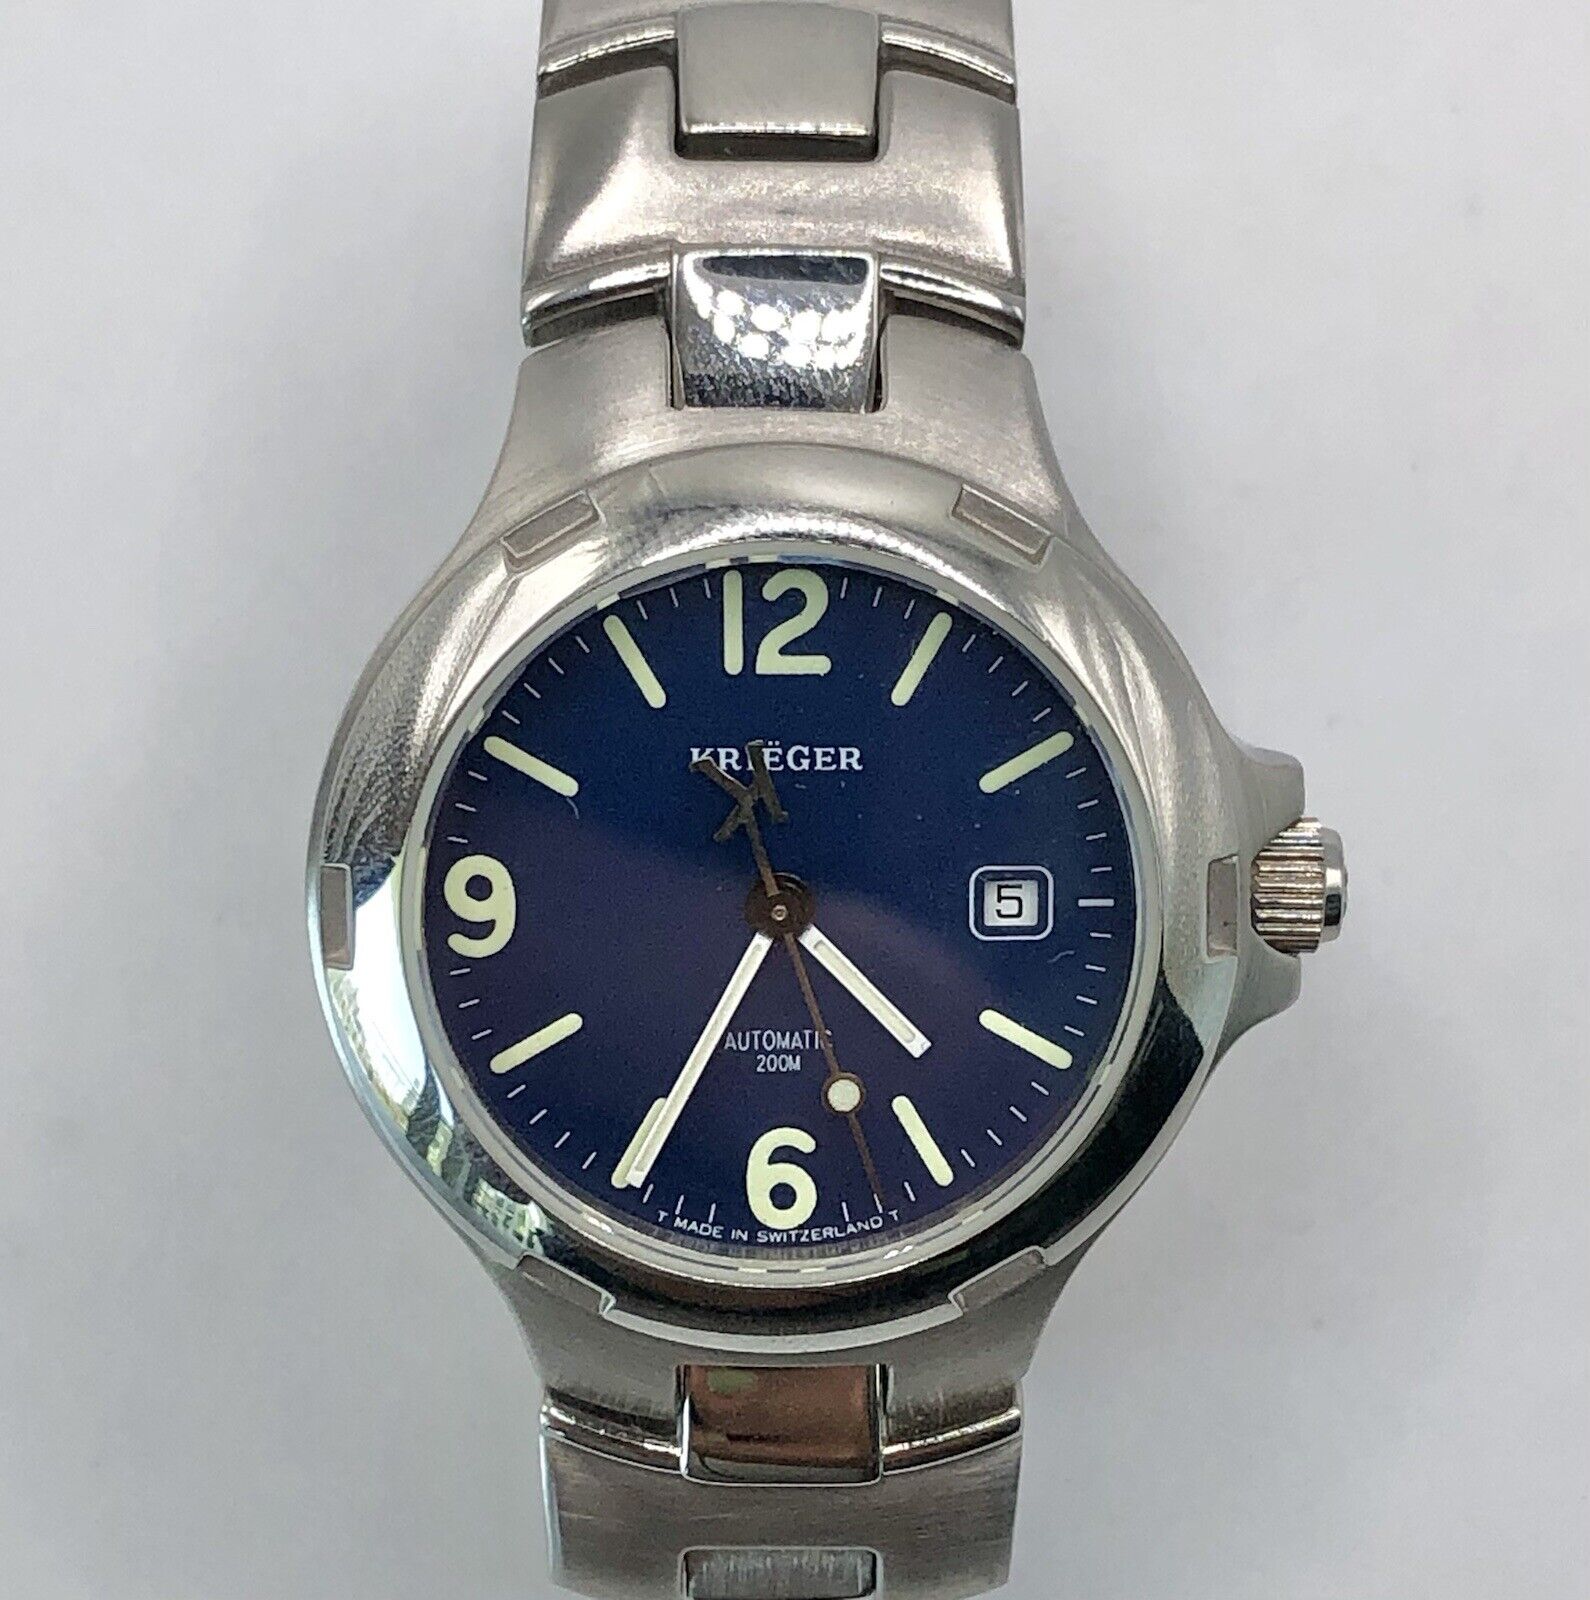 Krieger Oceano Stainless Steel Blue Dial Automatic Ladies Watch L501